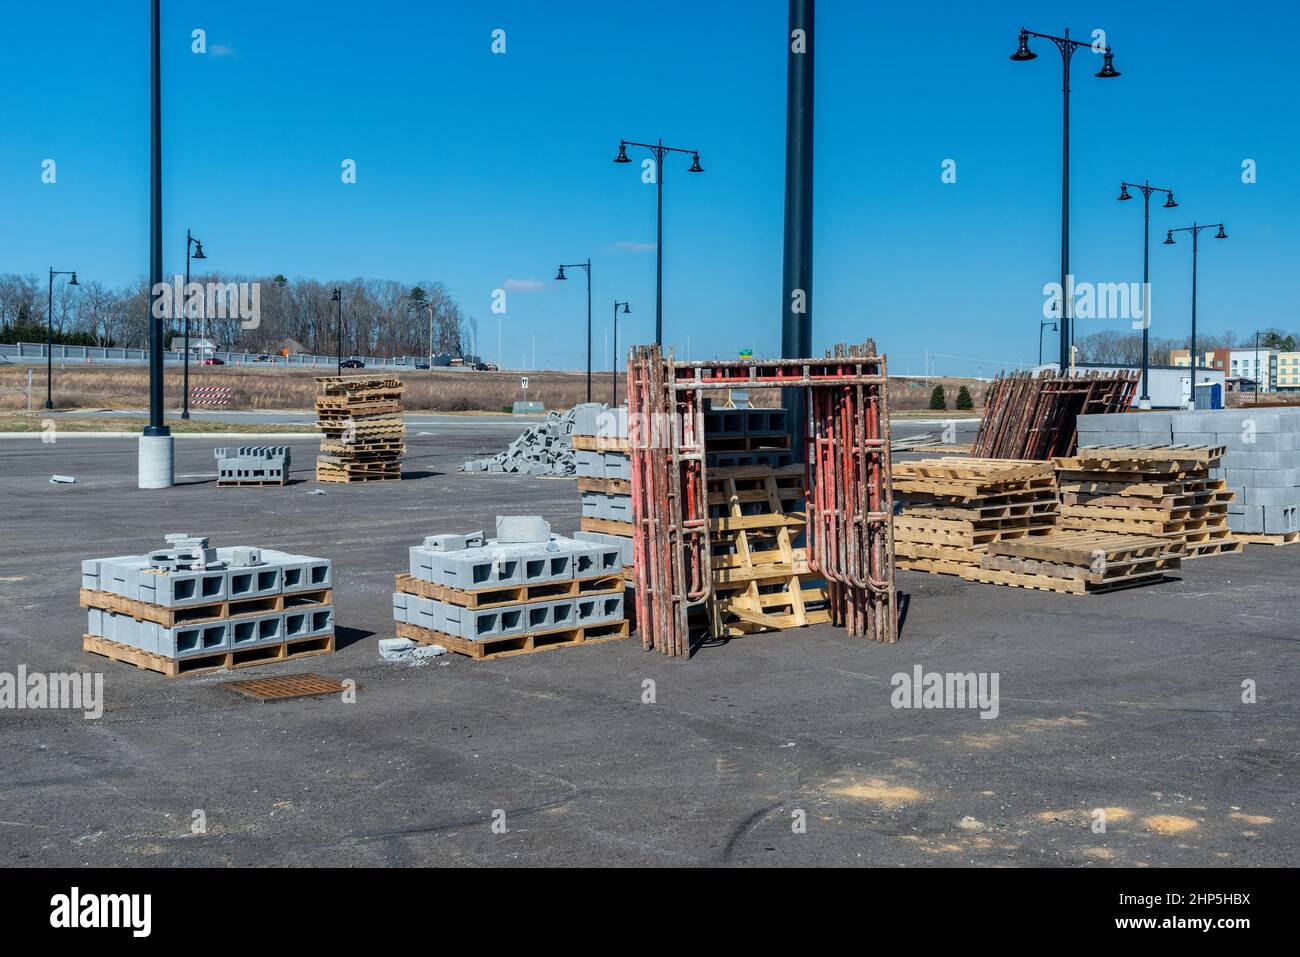 Horizontal shot of cinder blocks, scaffolding, and wooden pallets at an industrial construction site. Stock Photo